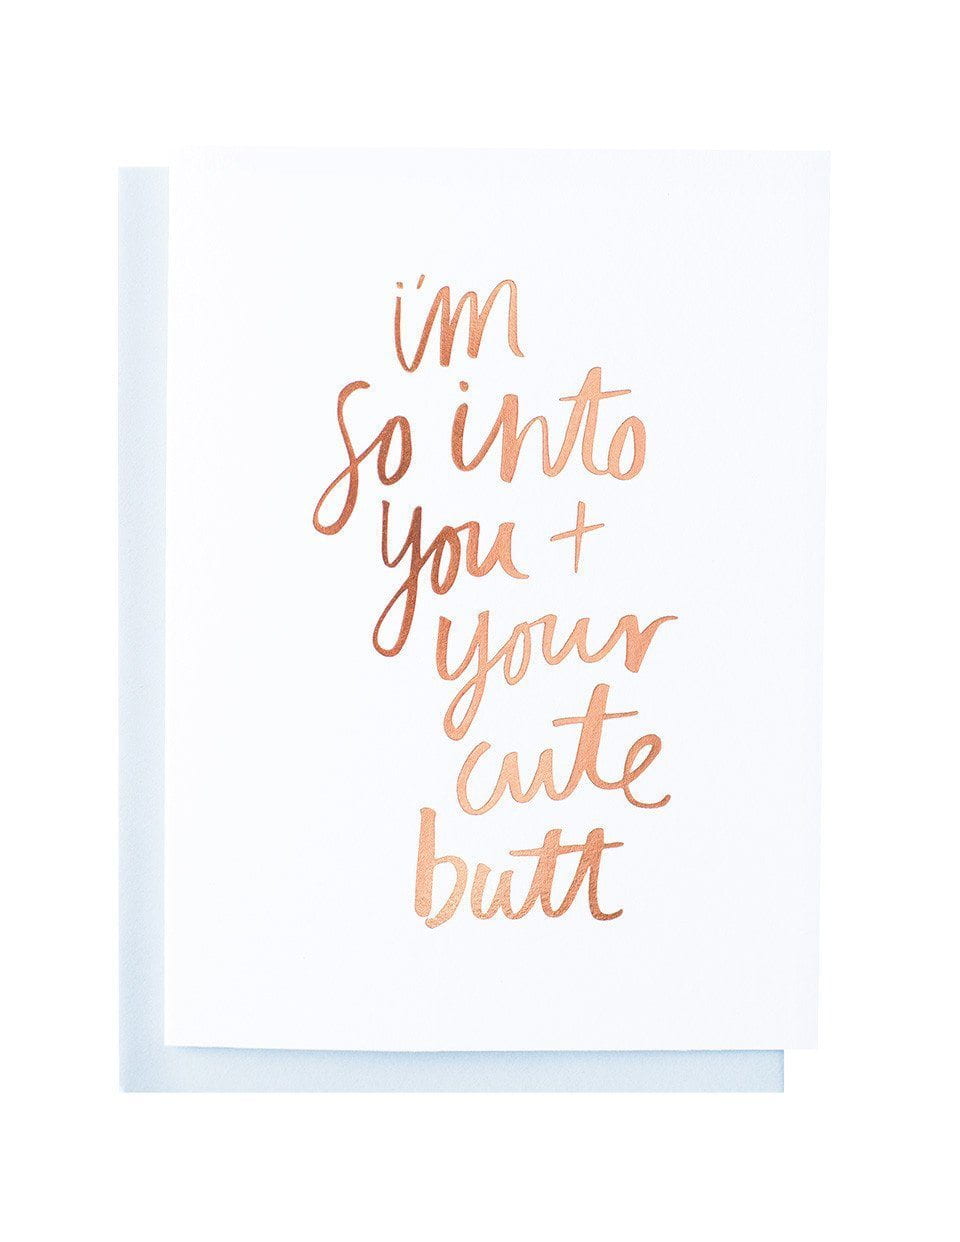 So Into You foiled greeting card | Blushing Confetti